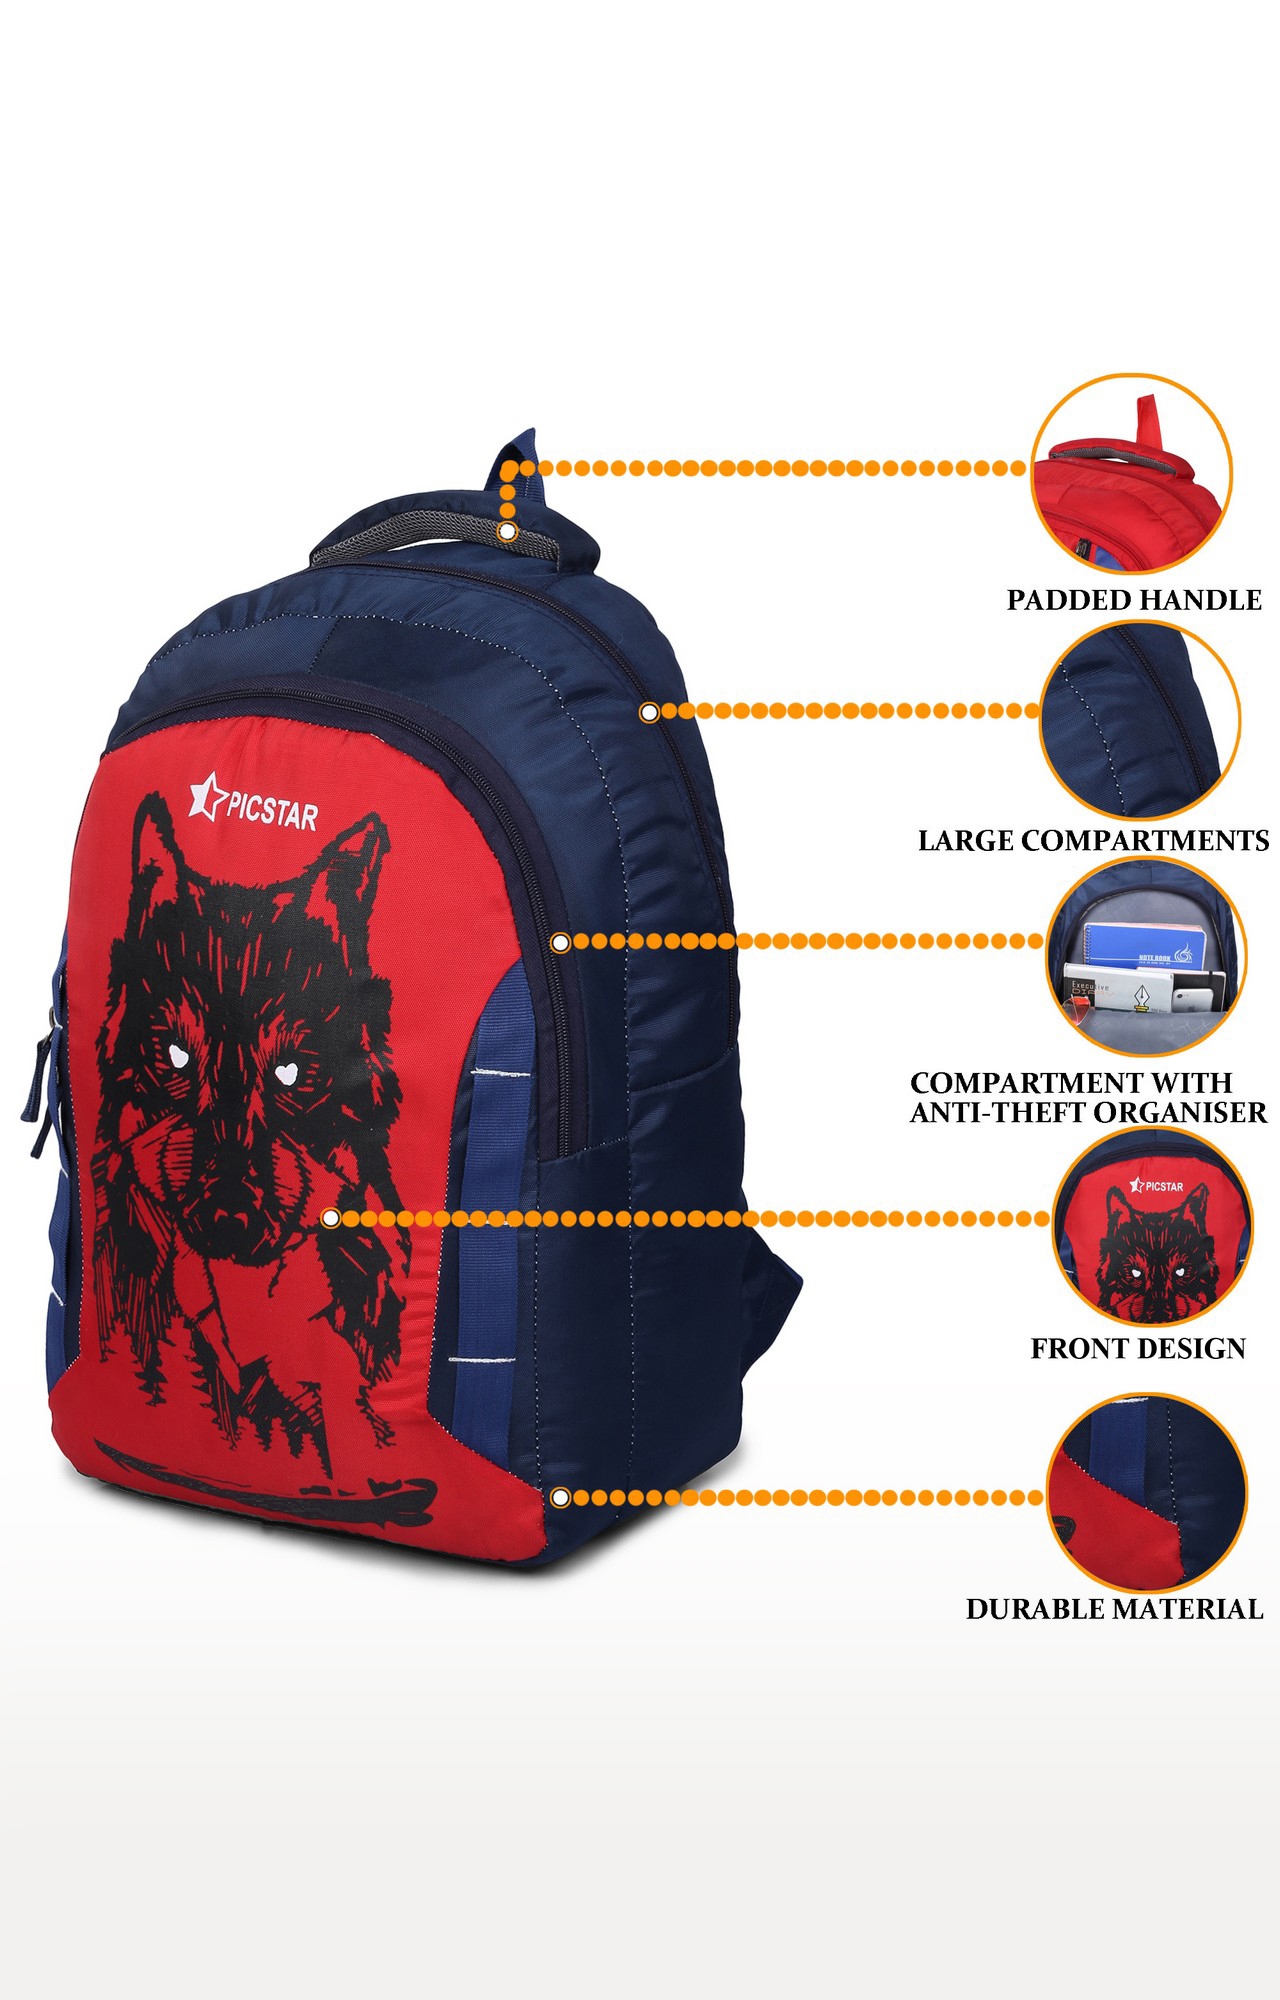 Picstar | Picstar Daredevil 35 L Navy And Red Backpack 4